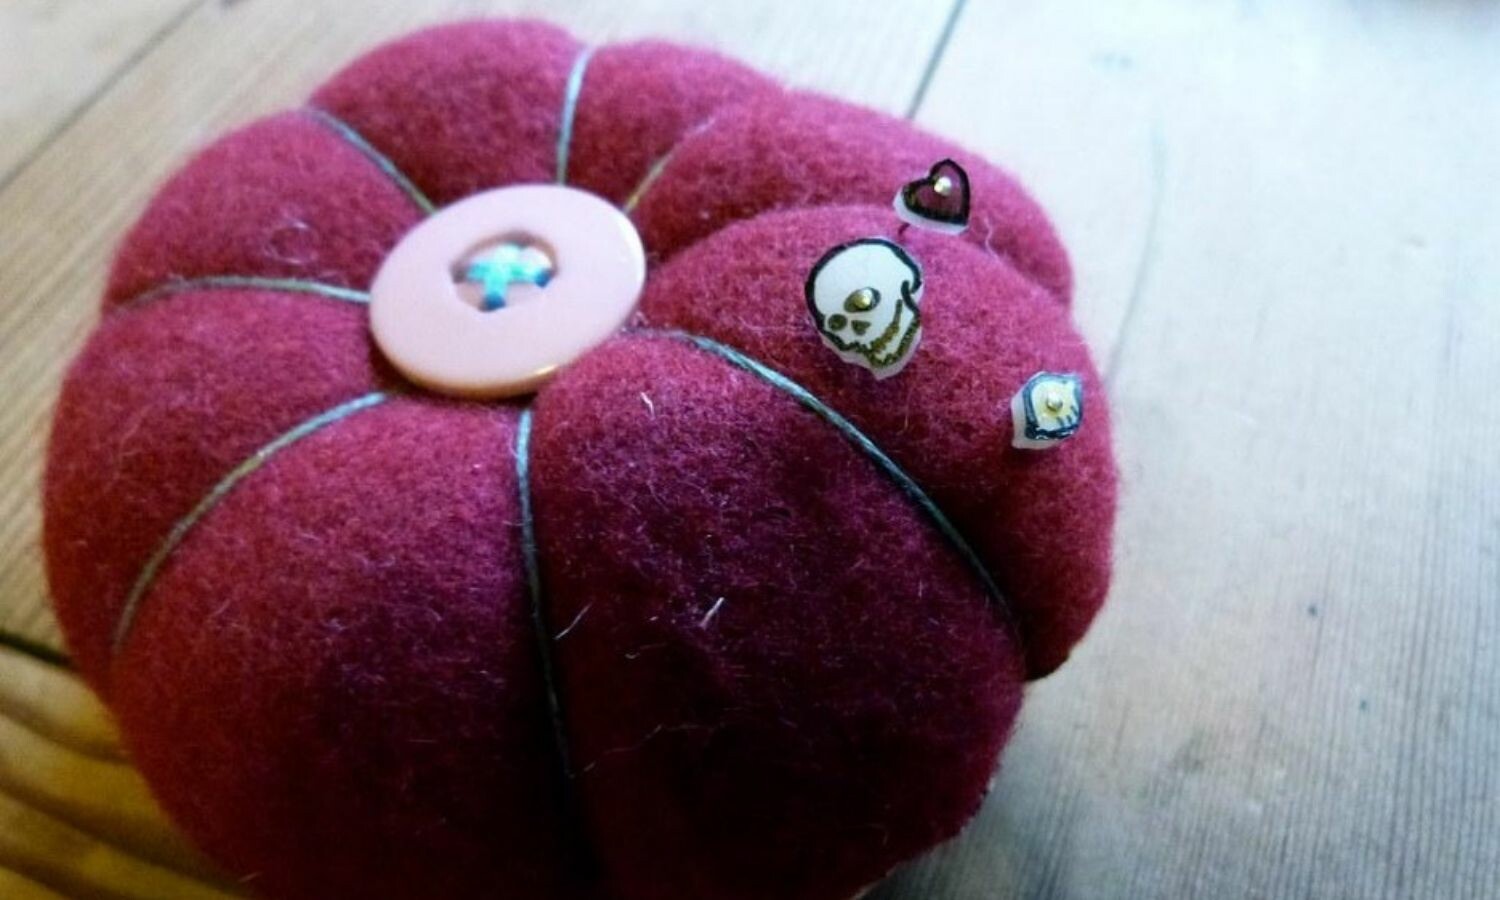 Close up image of a red pin cushion. Pinned to the cushion are small plastic images of a heart, a skull, and a lemon.